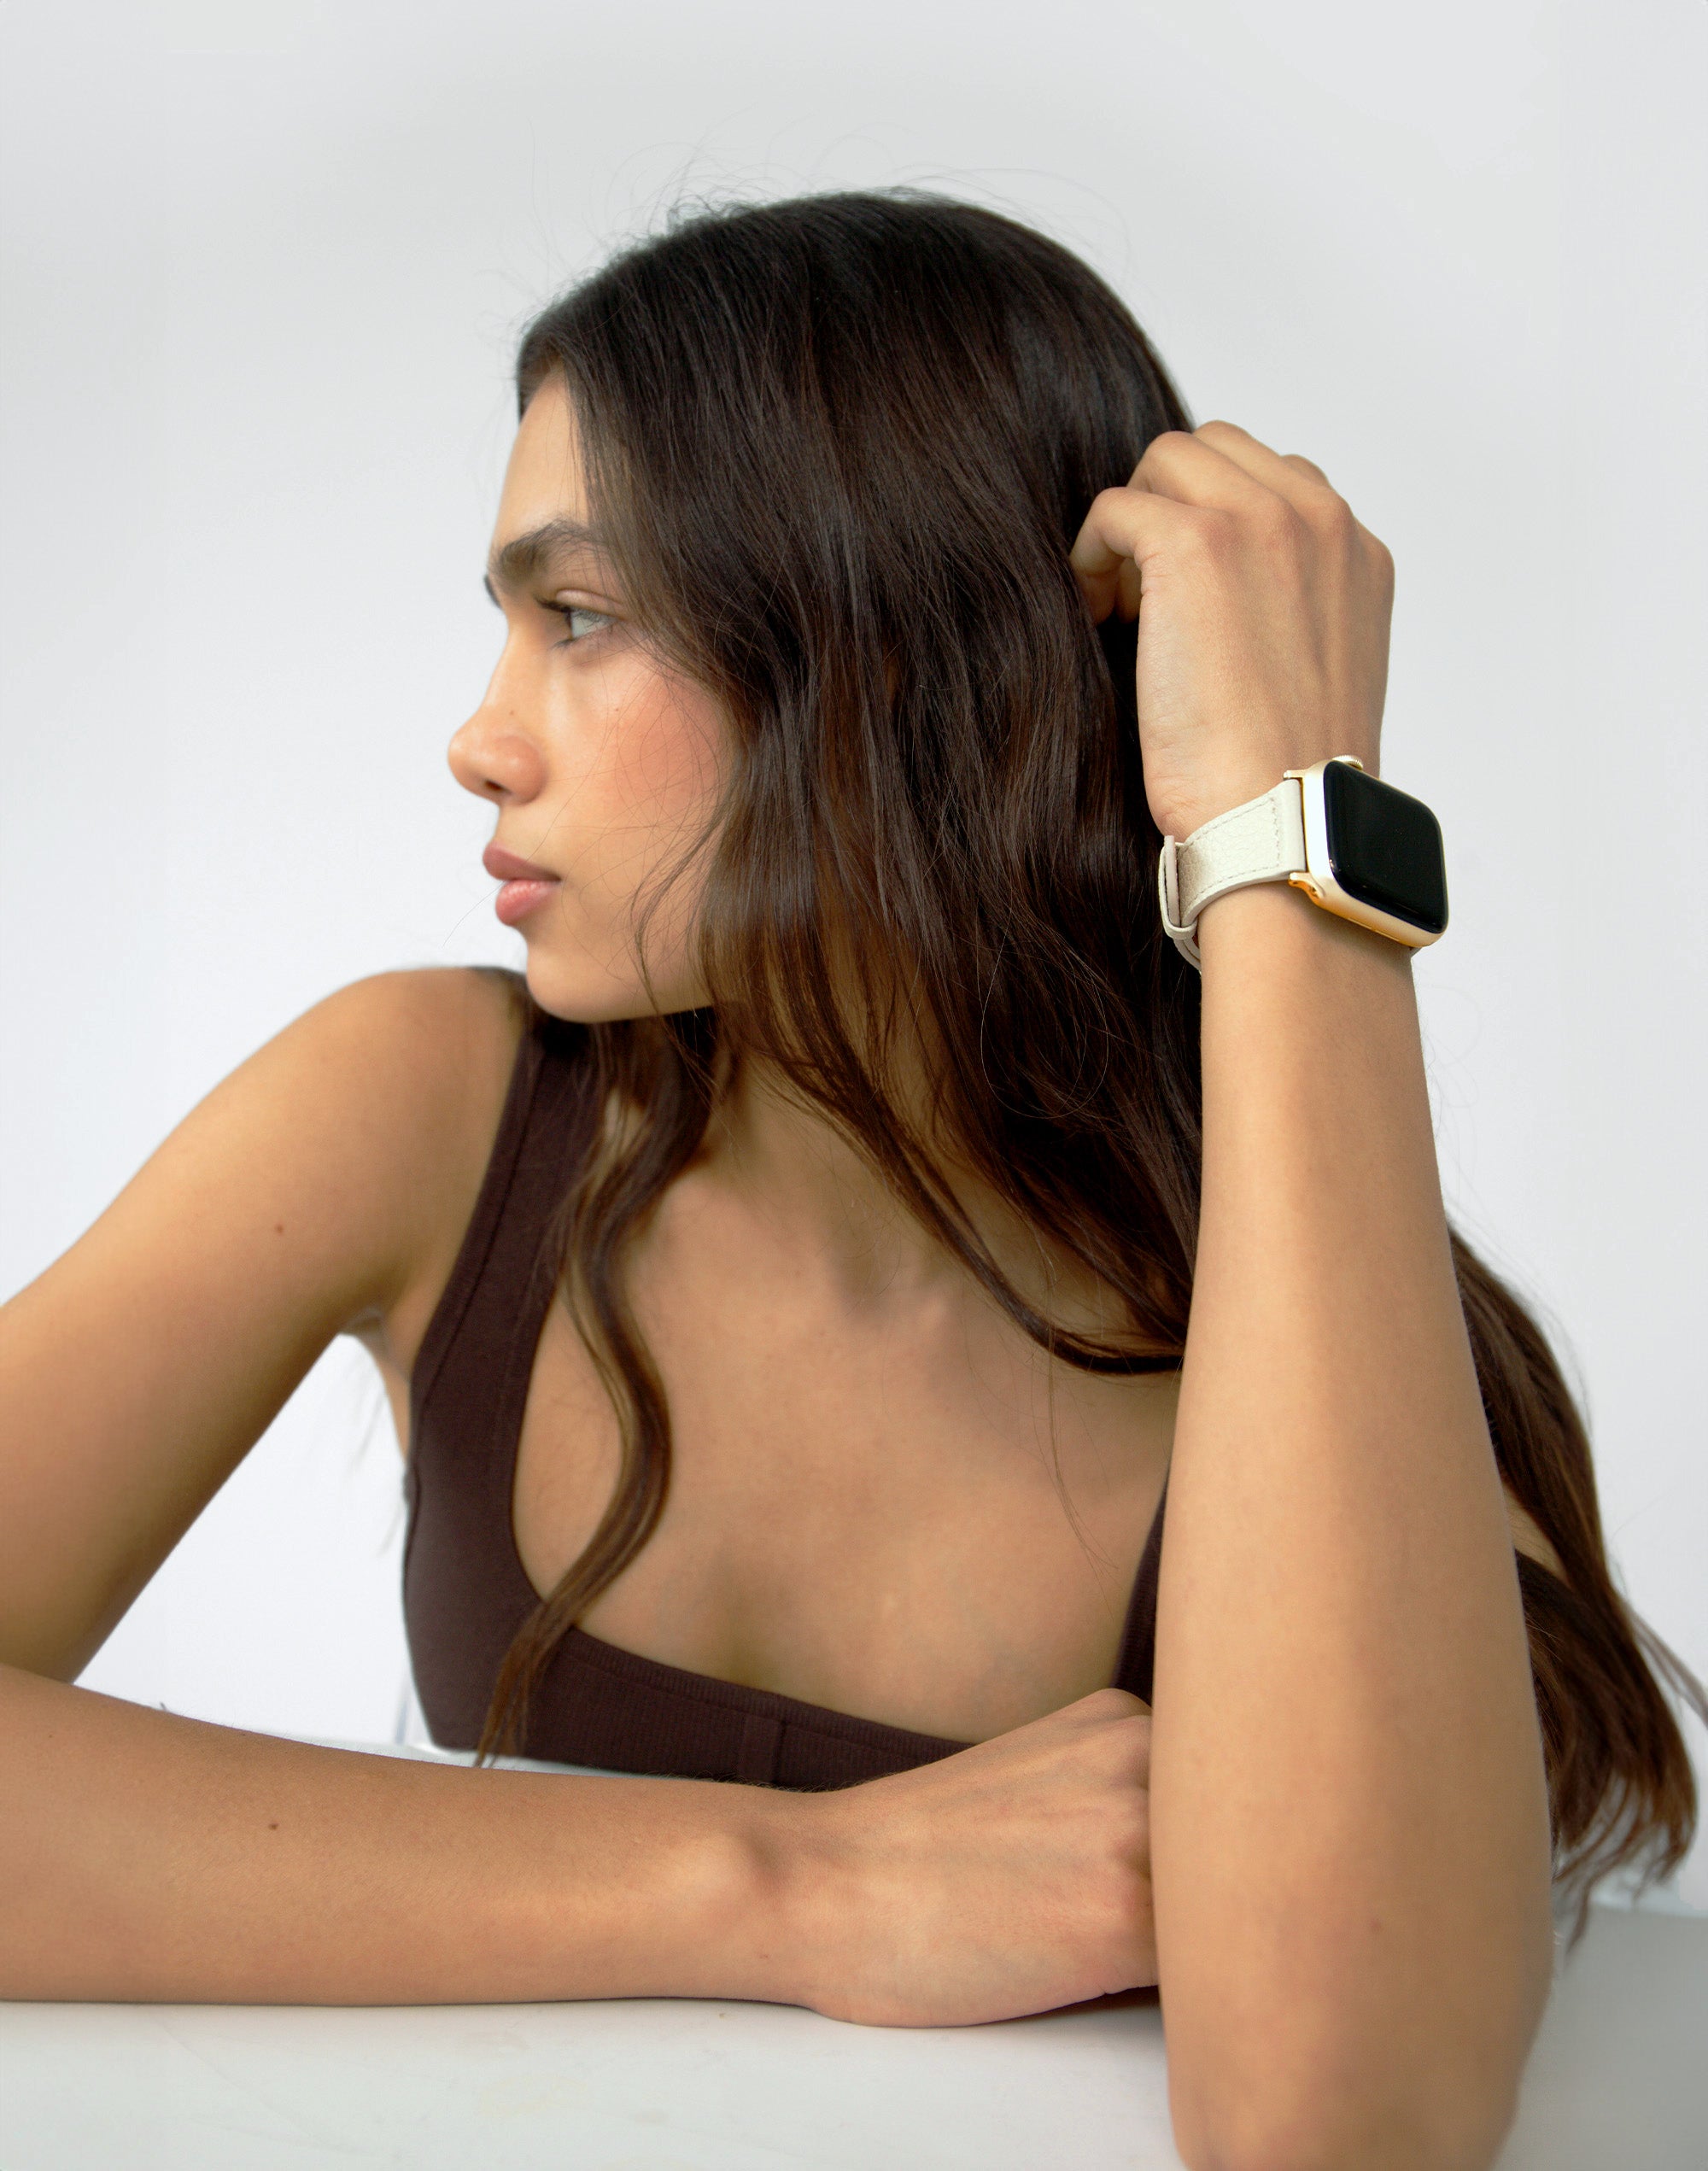 a women looks to the side, her left arm bent with an apple watch with a white leather band on her wrist